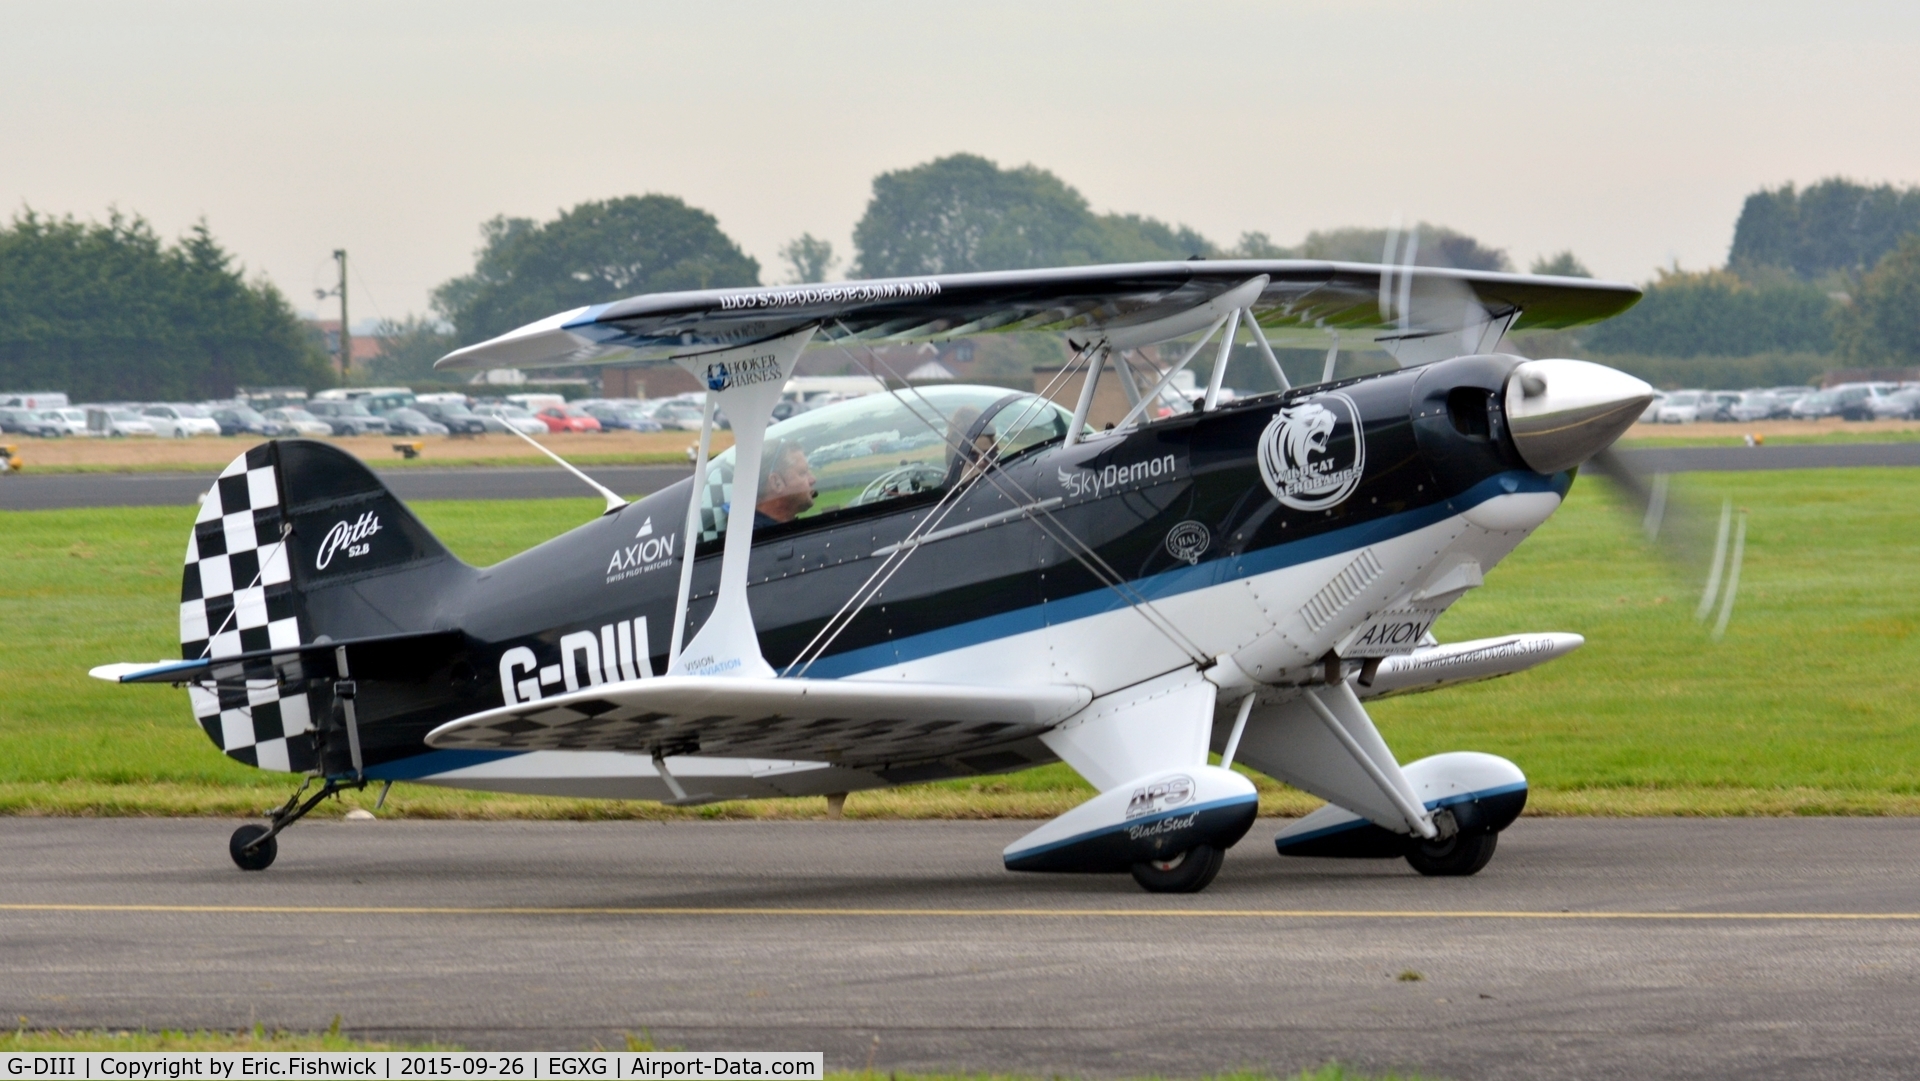 G-DIII, 1989 Christen Pitts S-2B Special C/N 5163, 3. G-DIII at The Yorkshire Air Show, Church Fenton, Sept. 2015.